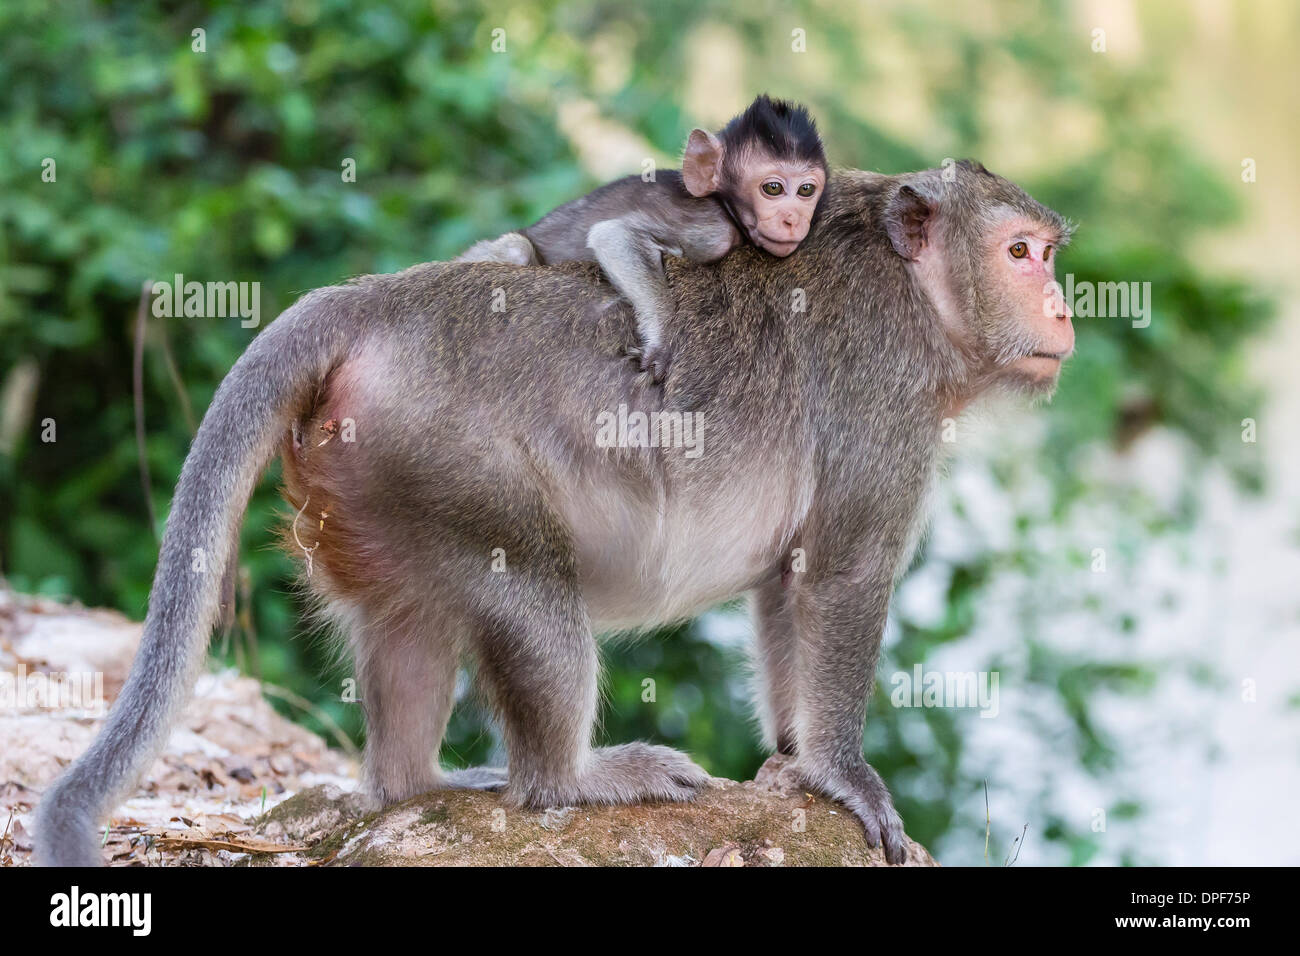 Young long-tailed macaque (Macaca fascicularis) atop its mother in Angkor Thom, Siem Reap, Cambodia, Indochina, Southeast Asia Stock Photo